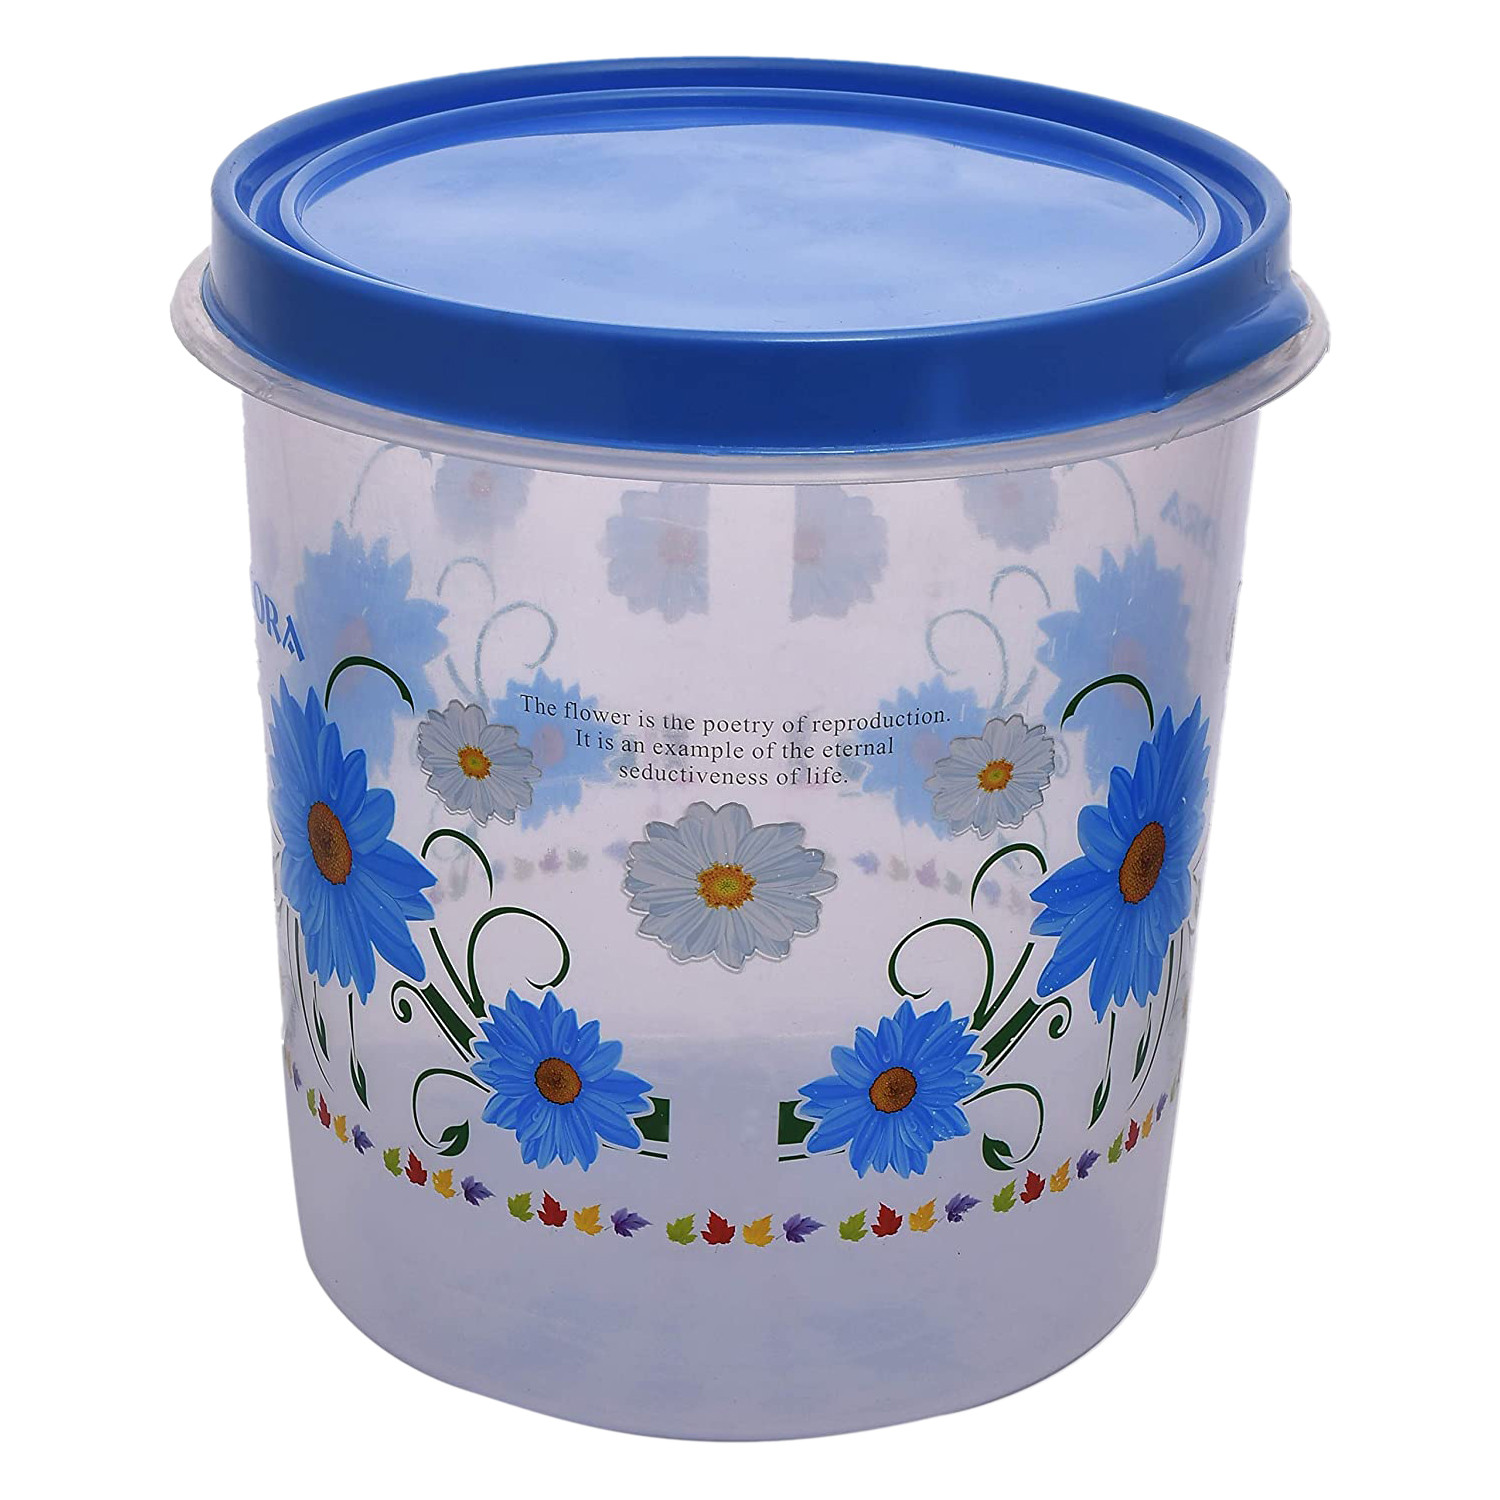 Kuber Industries Storage Container|Durable Plastic Floral Design BPA Free Food Kitchen Organizer With Lid|Food Utility Jar, 7 Ltr (Blue)